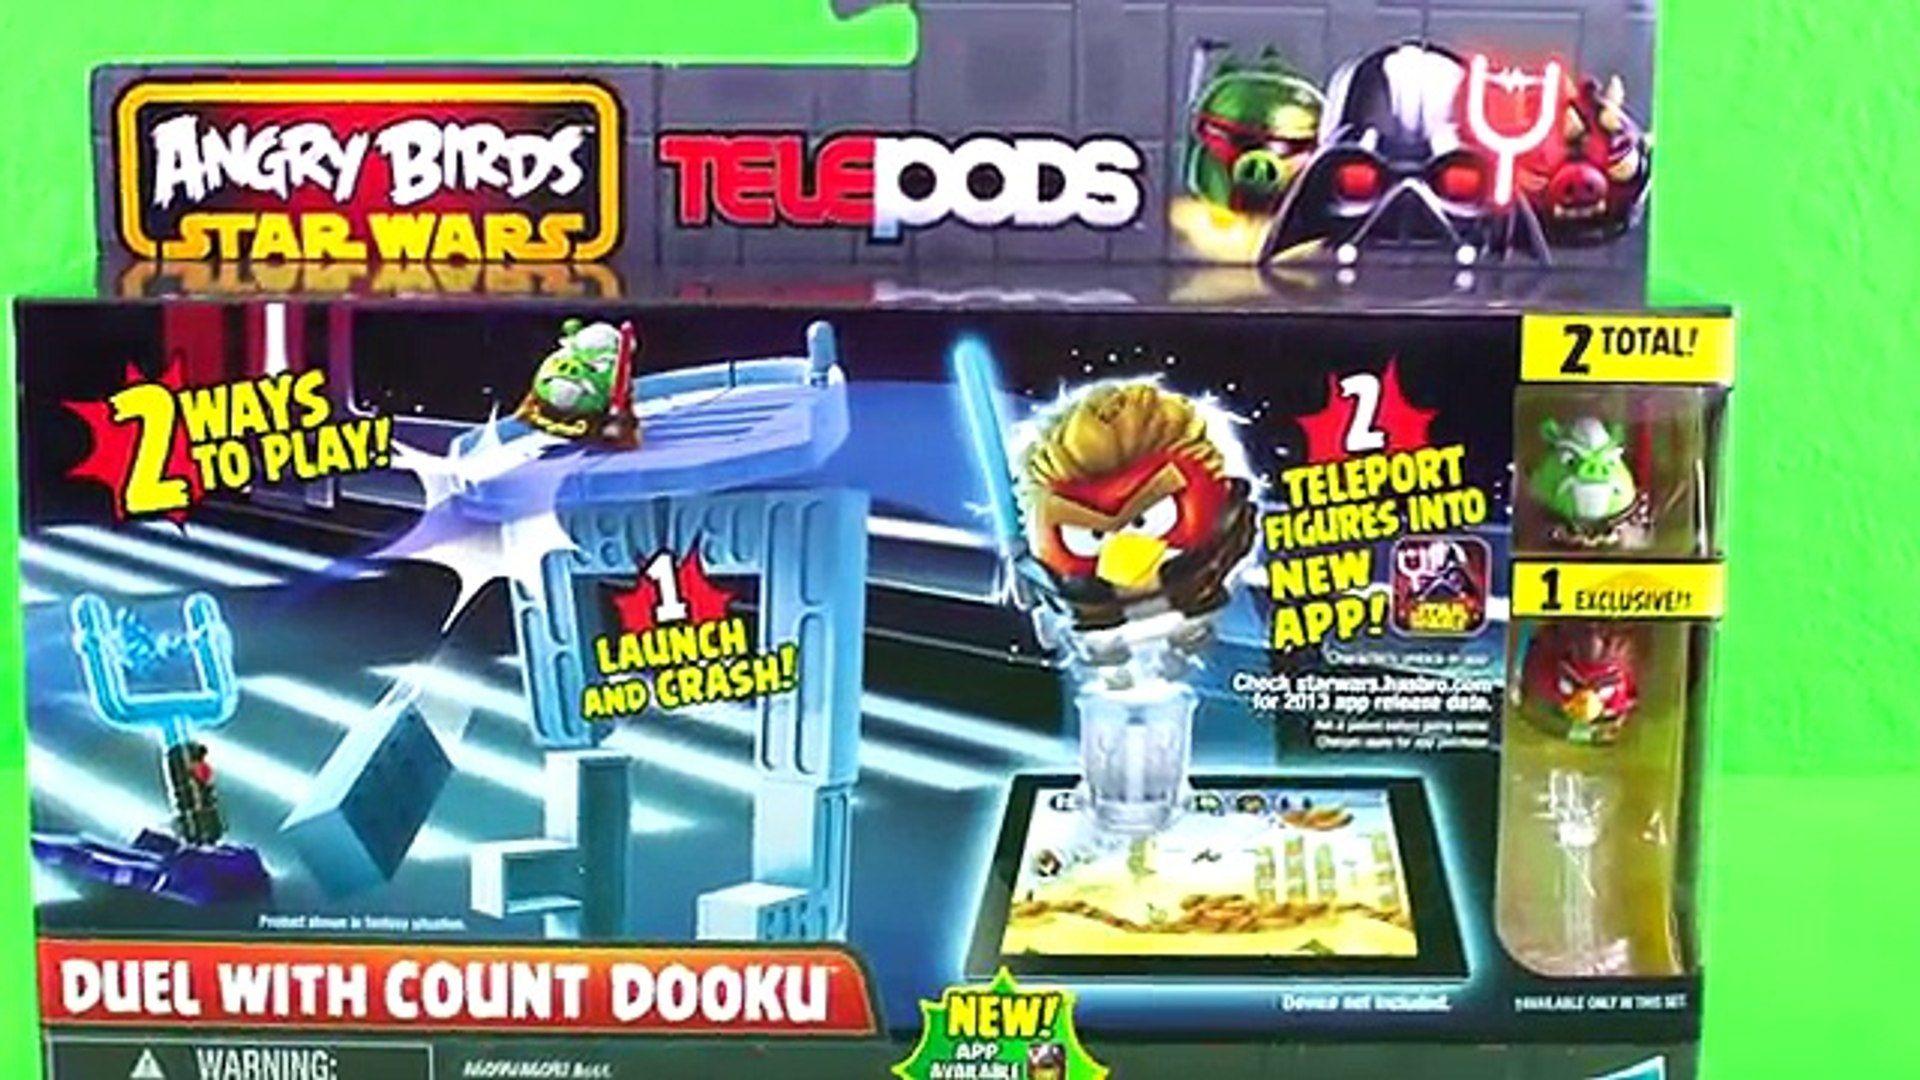 Telepods Logo - Angry Birds Star Wars Telepods DUEL WITH COUNT DOOKU!!!